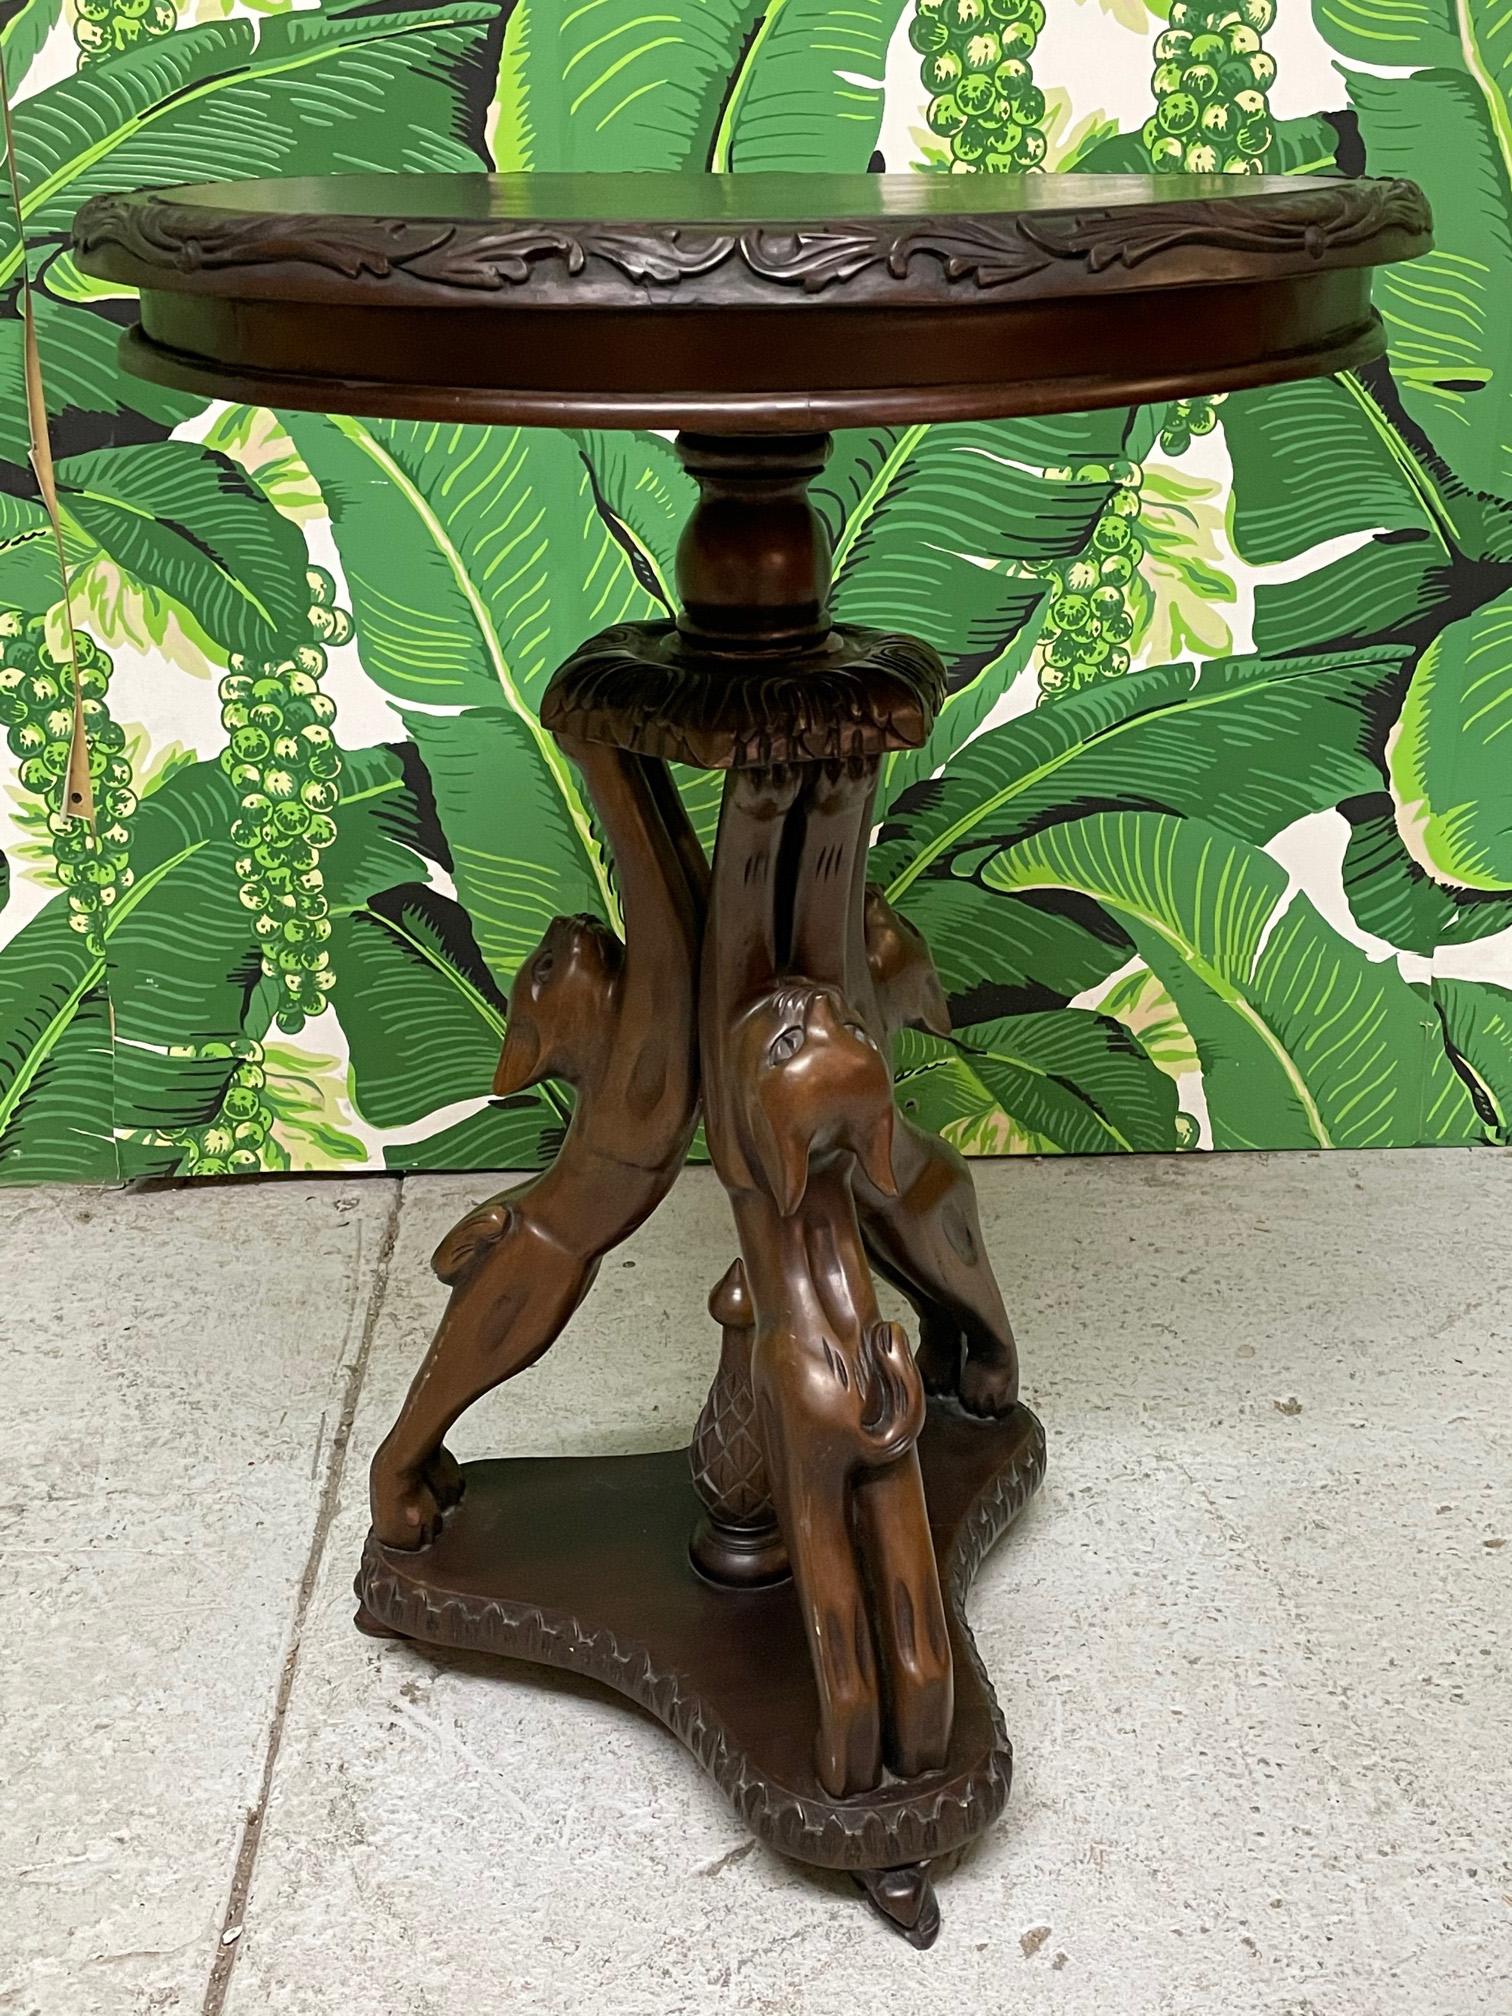 Hand carved side table features a fun motif of three cats forming a pedestal. Deep brown finish and a whimsical touch to any decor. Good vintage condition with minor imperfections consistent with age. May exhibit scuffs, marks, or wear, see photos